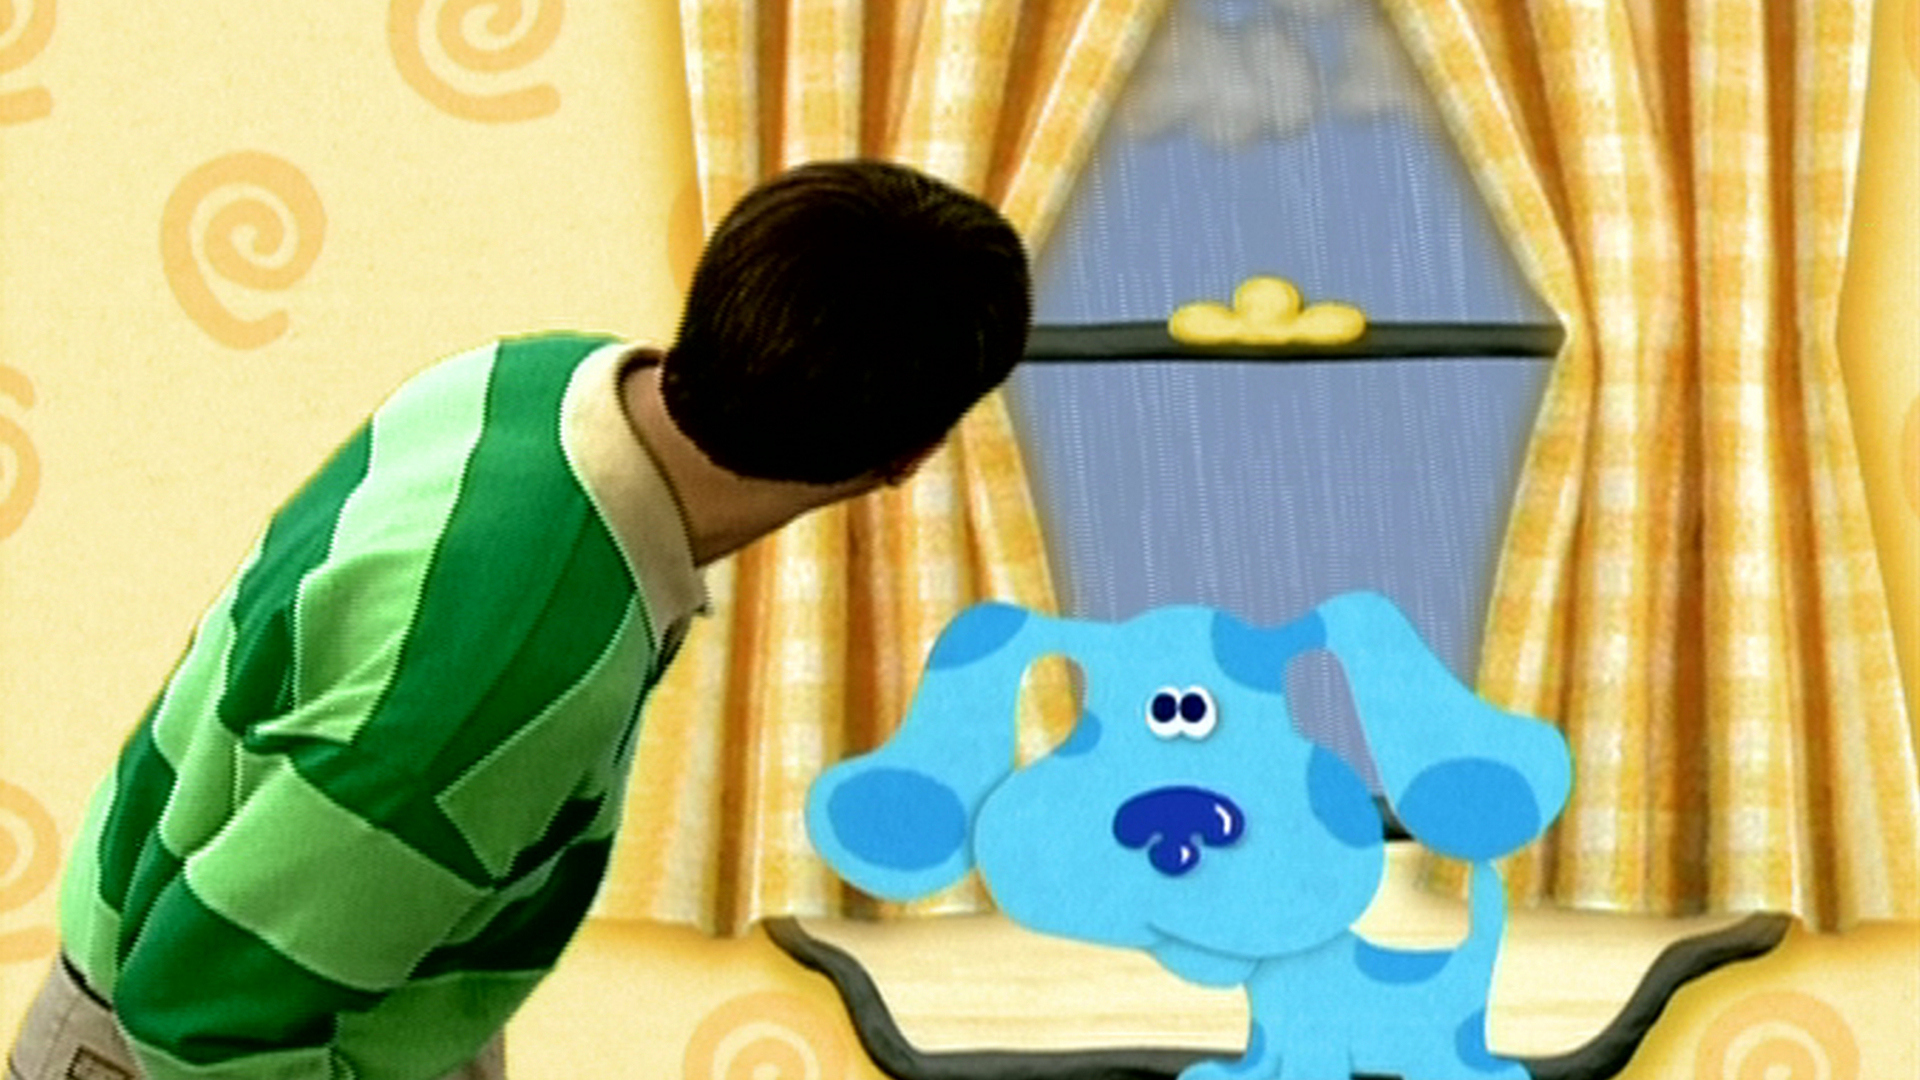 Blues clues stormy weather